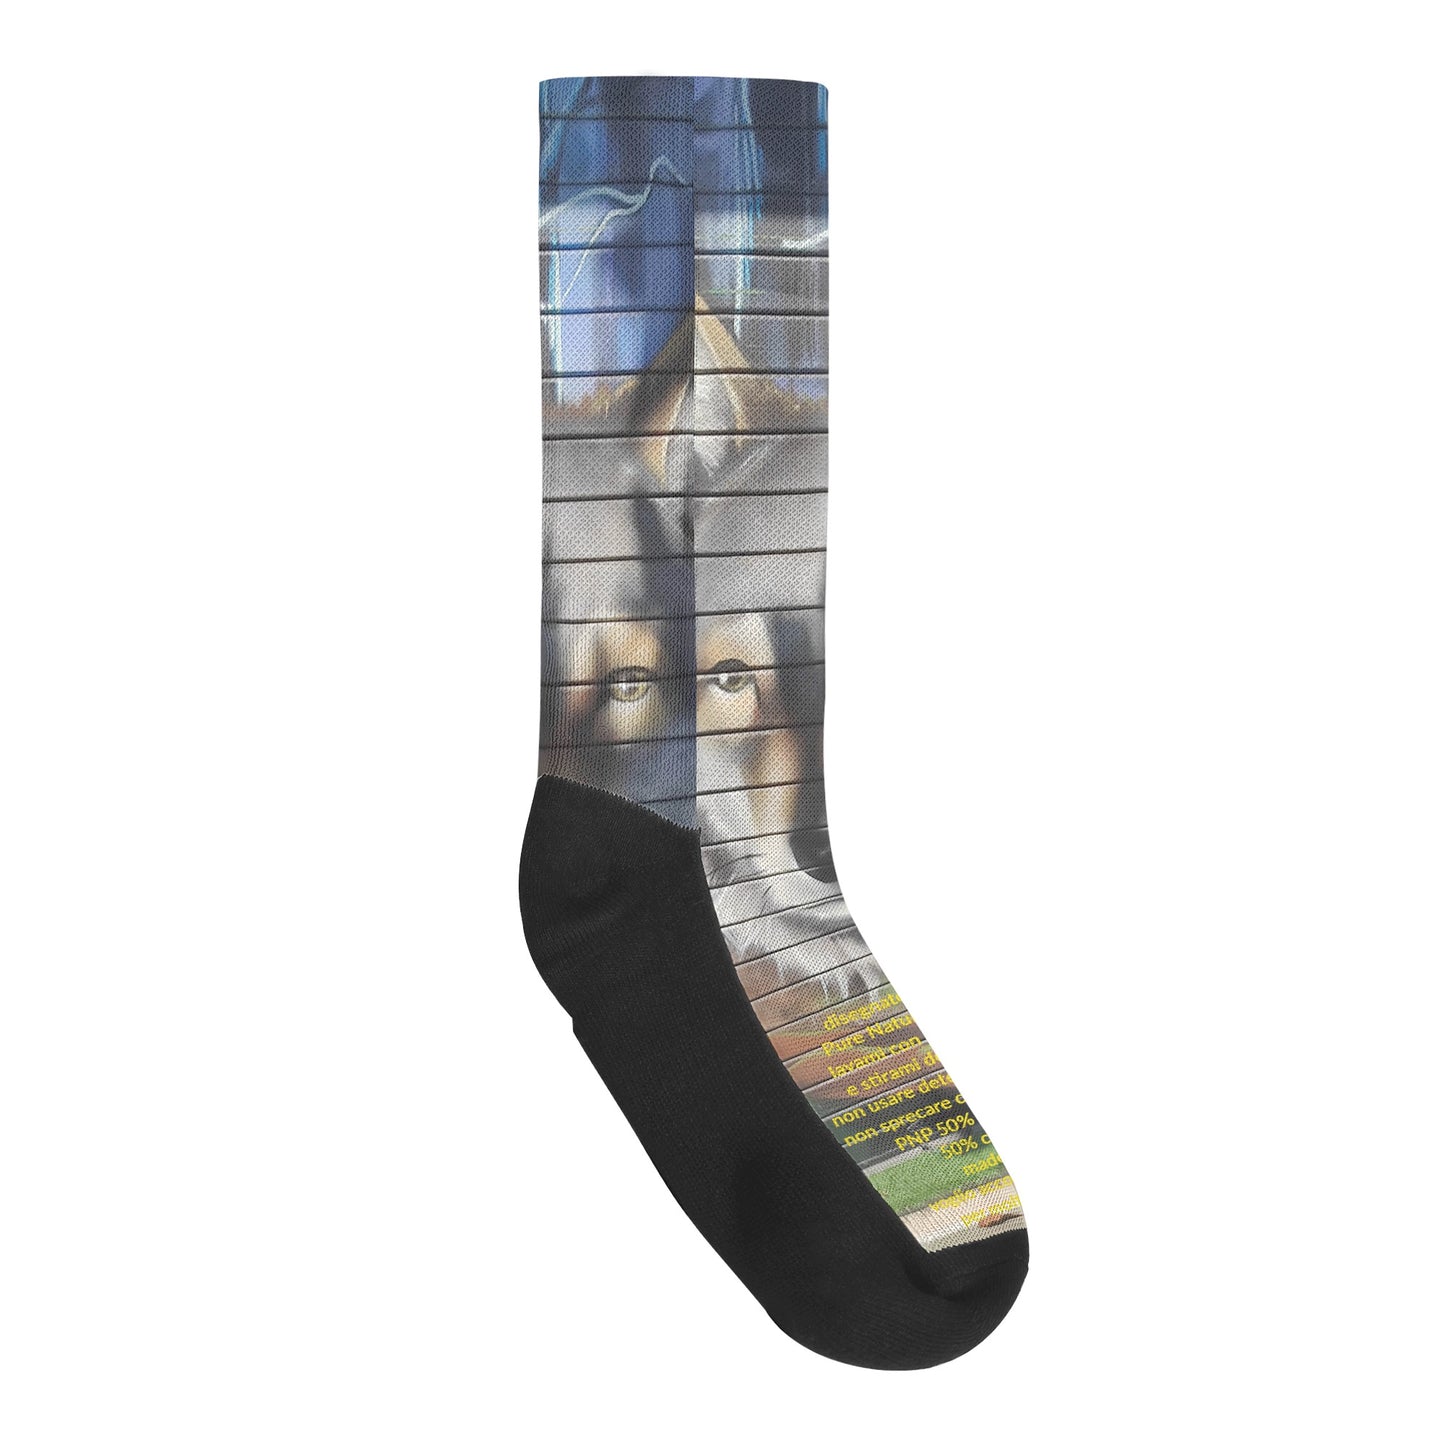 Pure Nature Project lupo Crew Socks